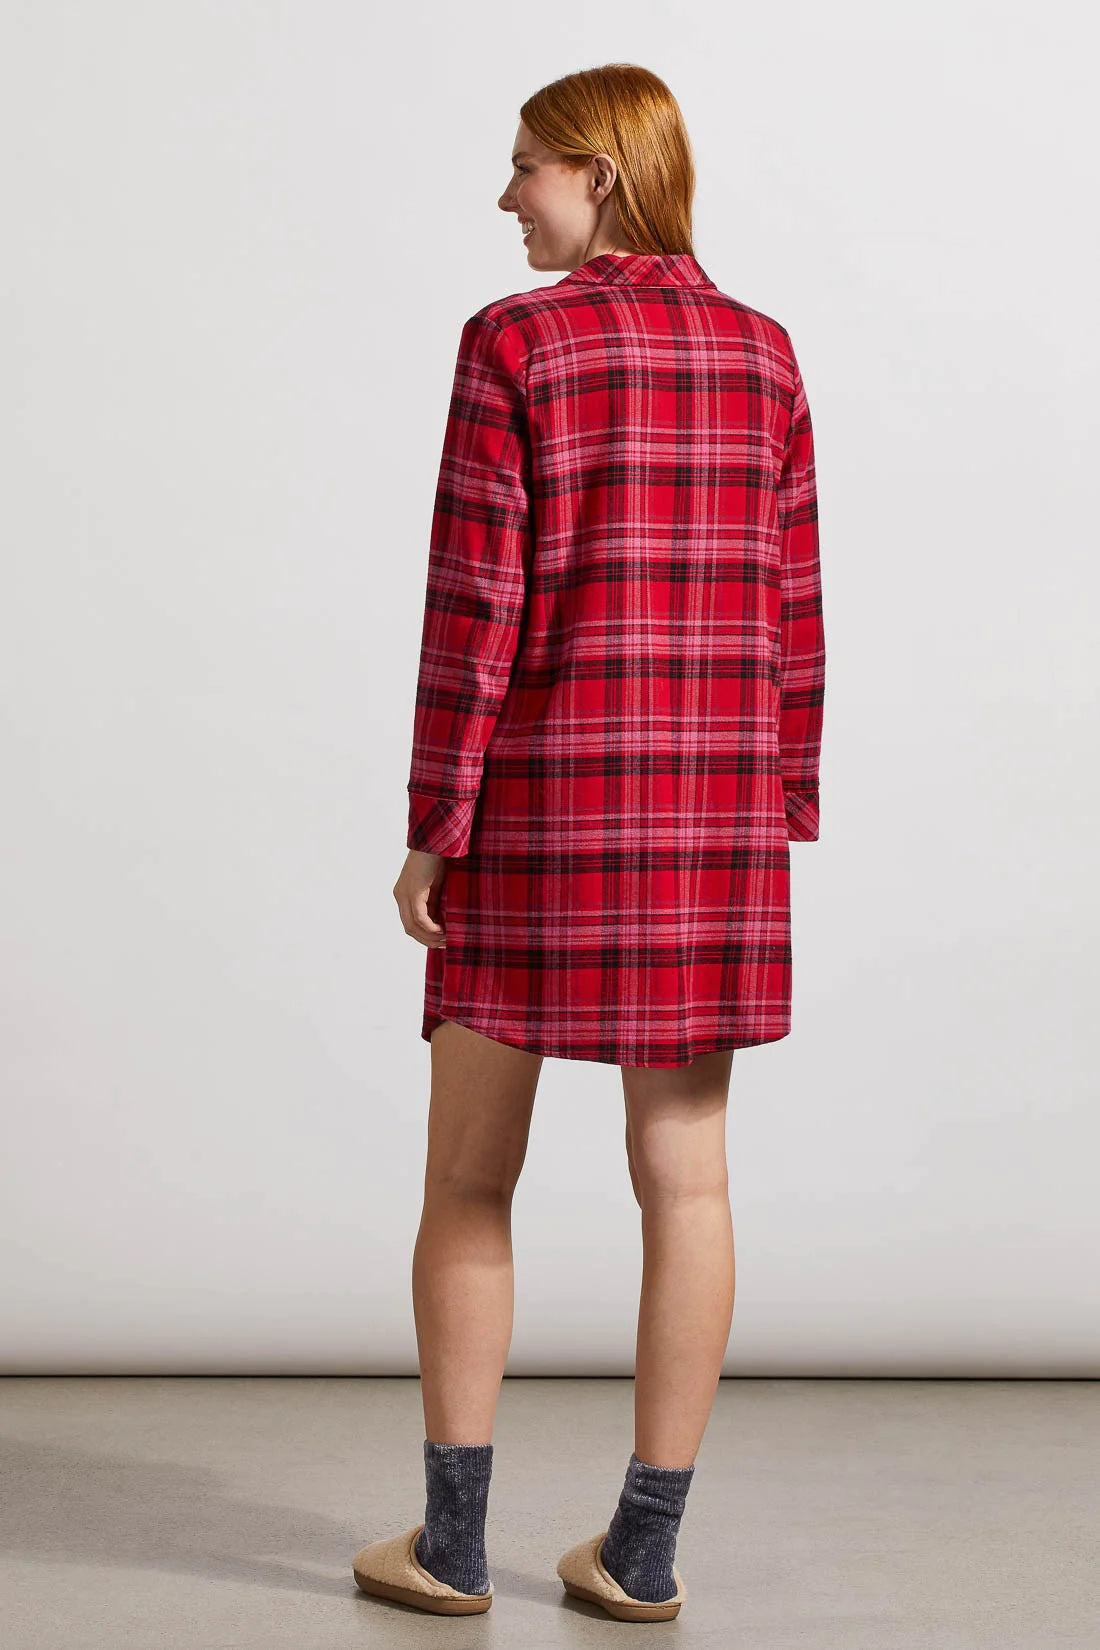 Crawl into bed feeling comfy-as-can-be with this long-sleeve nightshirt crafted from super soft plaid flannel. 